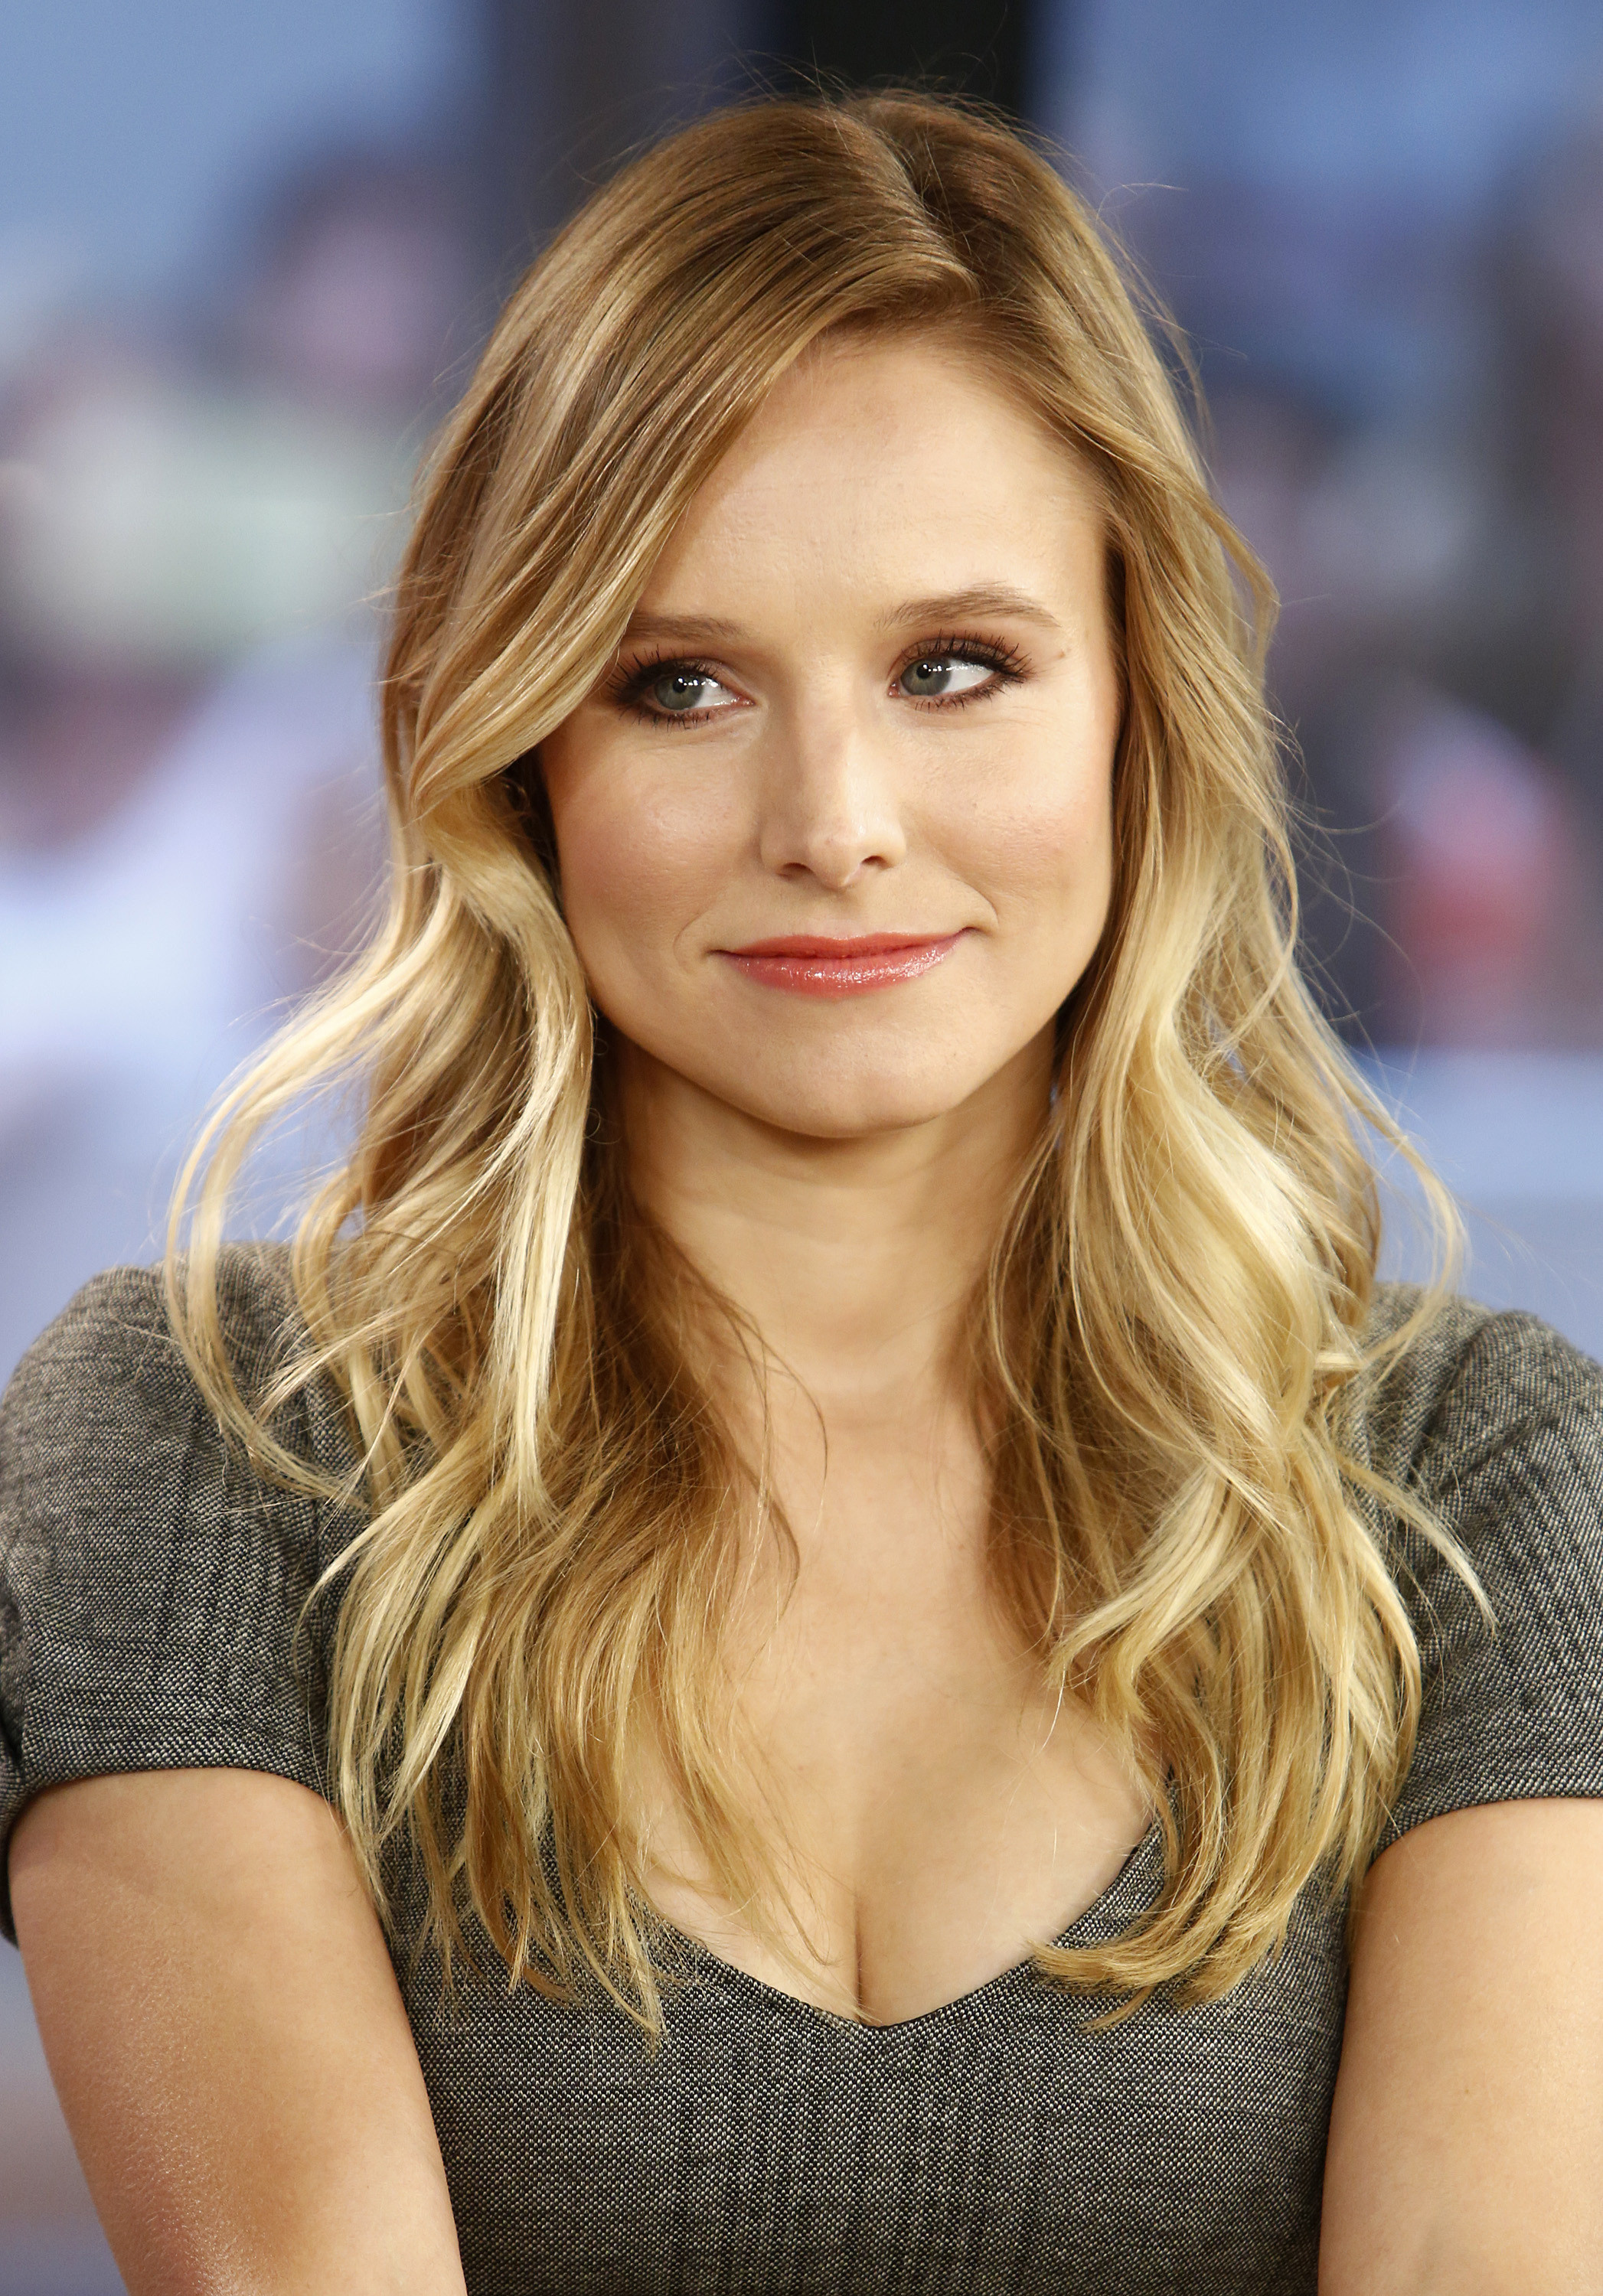 120+ Kristen Bell HD Wallpapers and Backgrounds